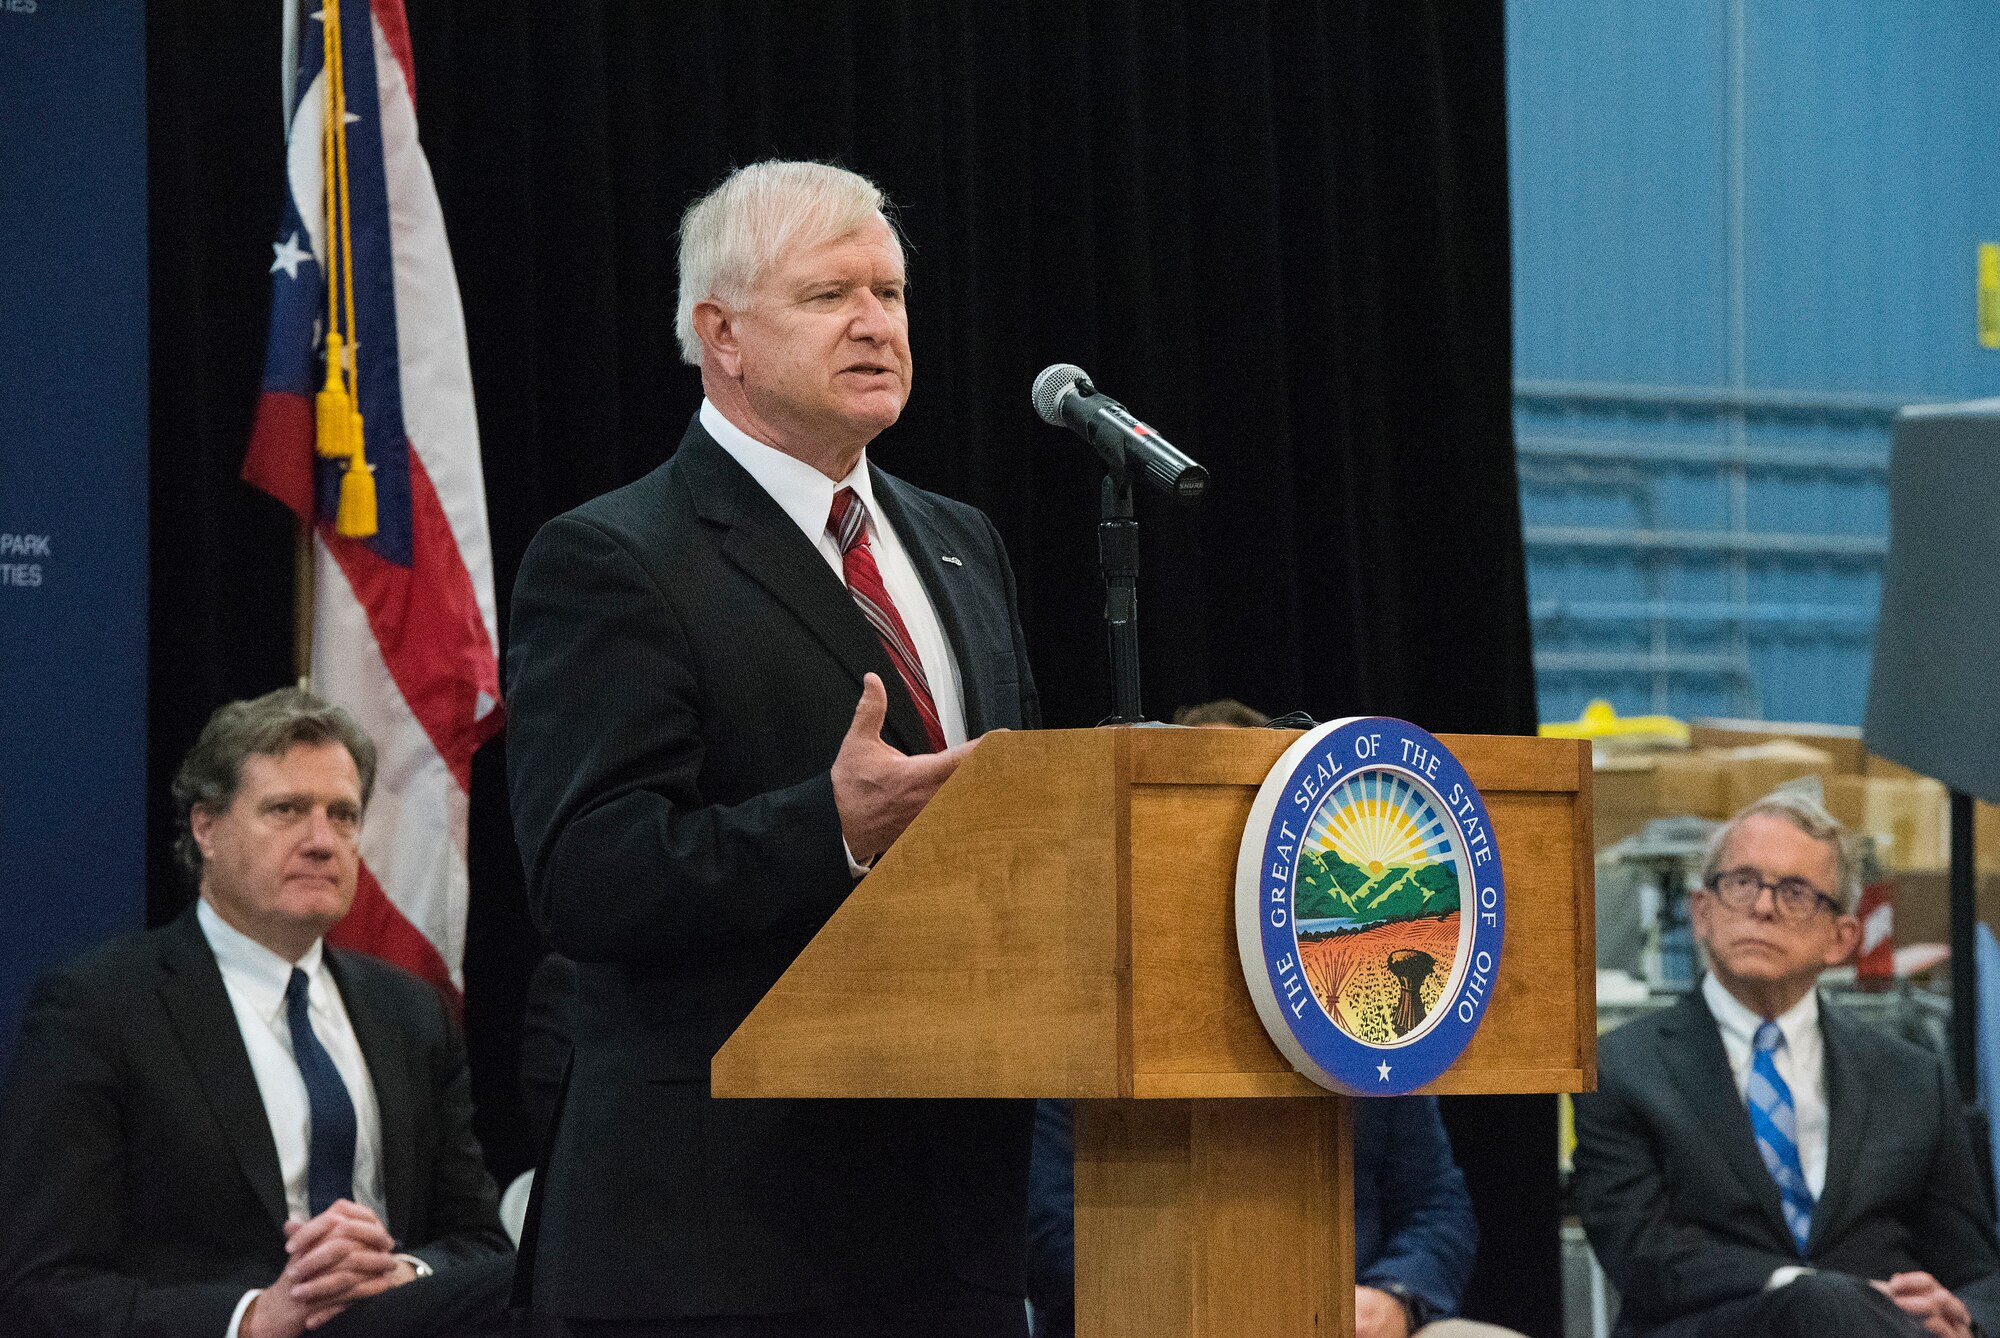 Jack Blackhurst, Air Force Research Laboratory executive director, speaks as U.S. Rep. Mike Turner, left, and Ohio Gov. Mike DeWine, right, listen on April 26, 2019, at the announcement that the Federal Aviation Administration has granted a Certificate of Waiver or Authorization to AFRL for beyond visual line of sight flights of unmanned aerial systems during an event at the Sprinfield-Beckley Municipal Airport. The project took the cooperation of several federal, state, and local agencies to reach the approval stage. (U.S. Air Force photo by R.J. Oriez)